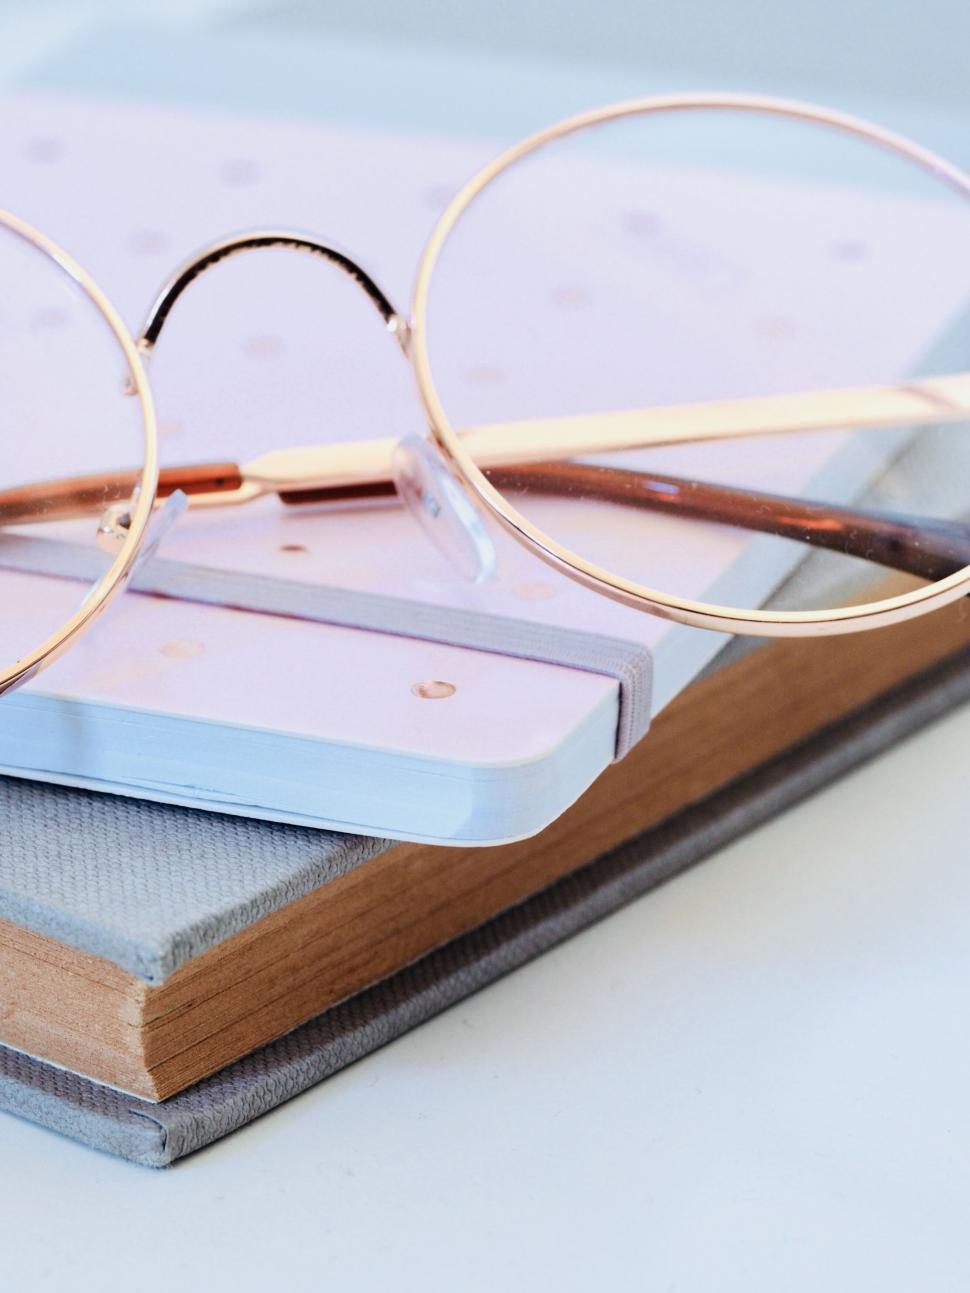 Free Image of Glasses on a book with soft background 